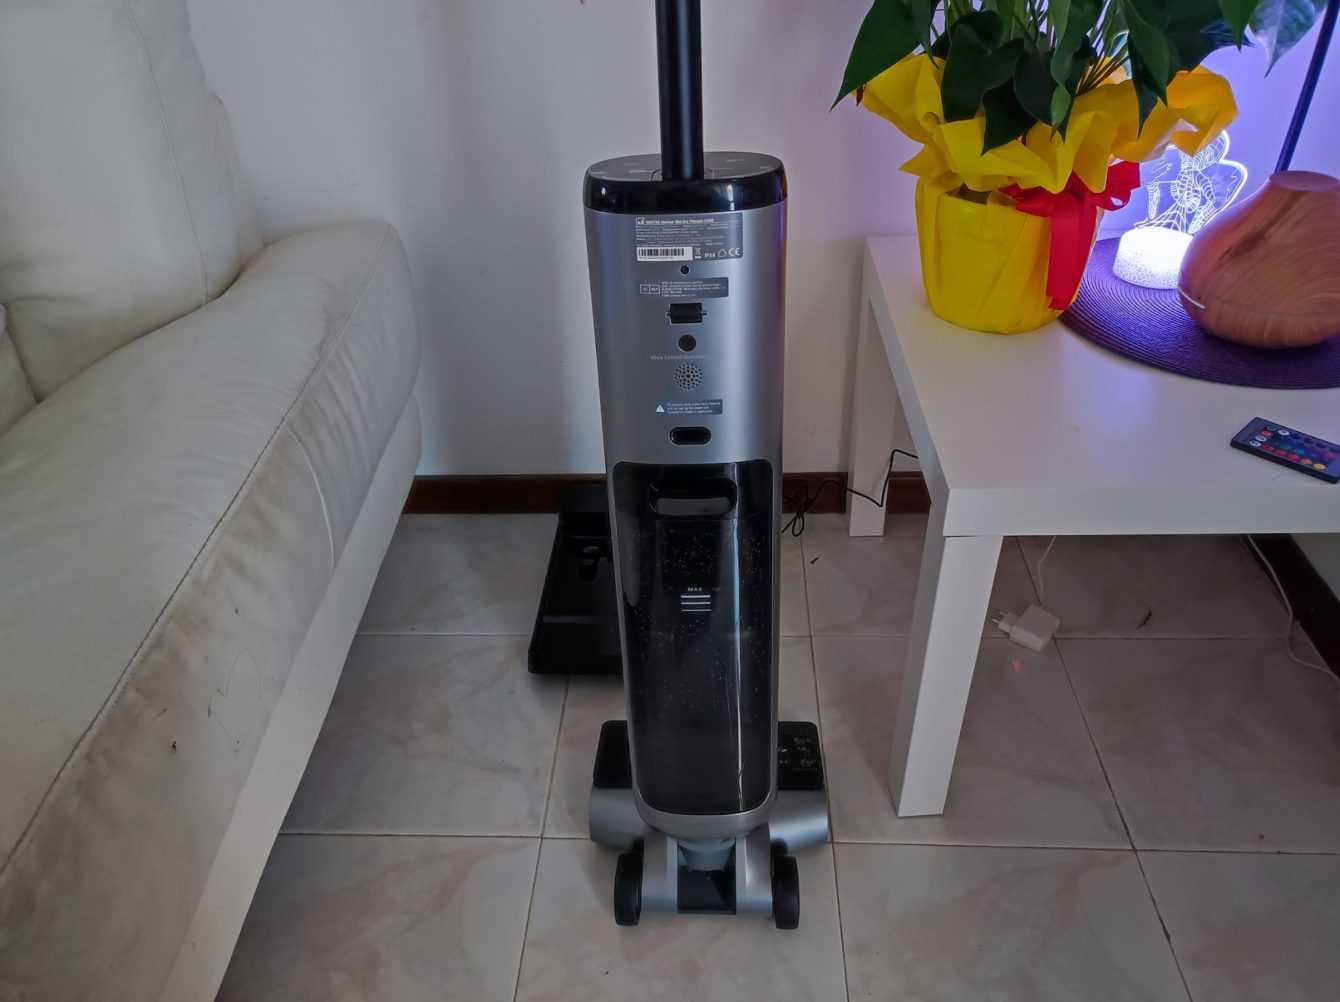 Osotek Horizon h200 review: exceptional vacuum cleaner and floor washer?